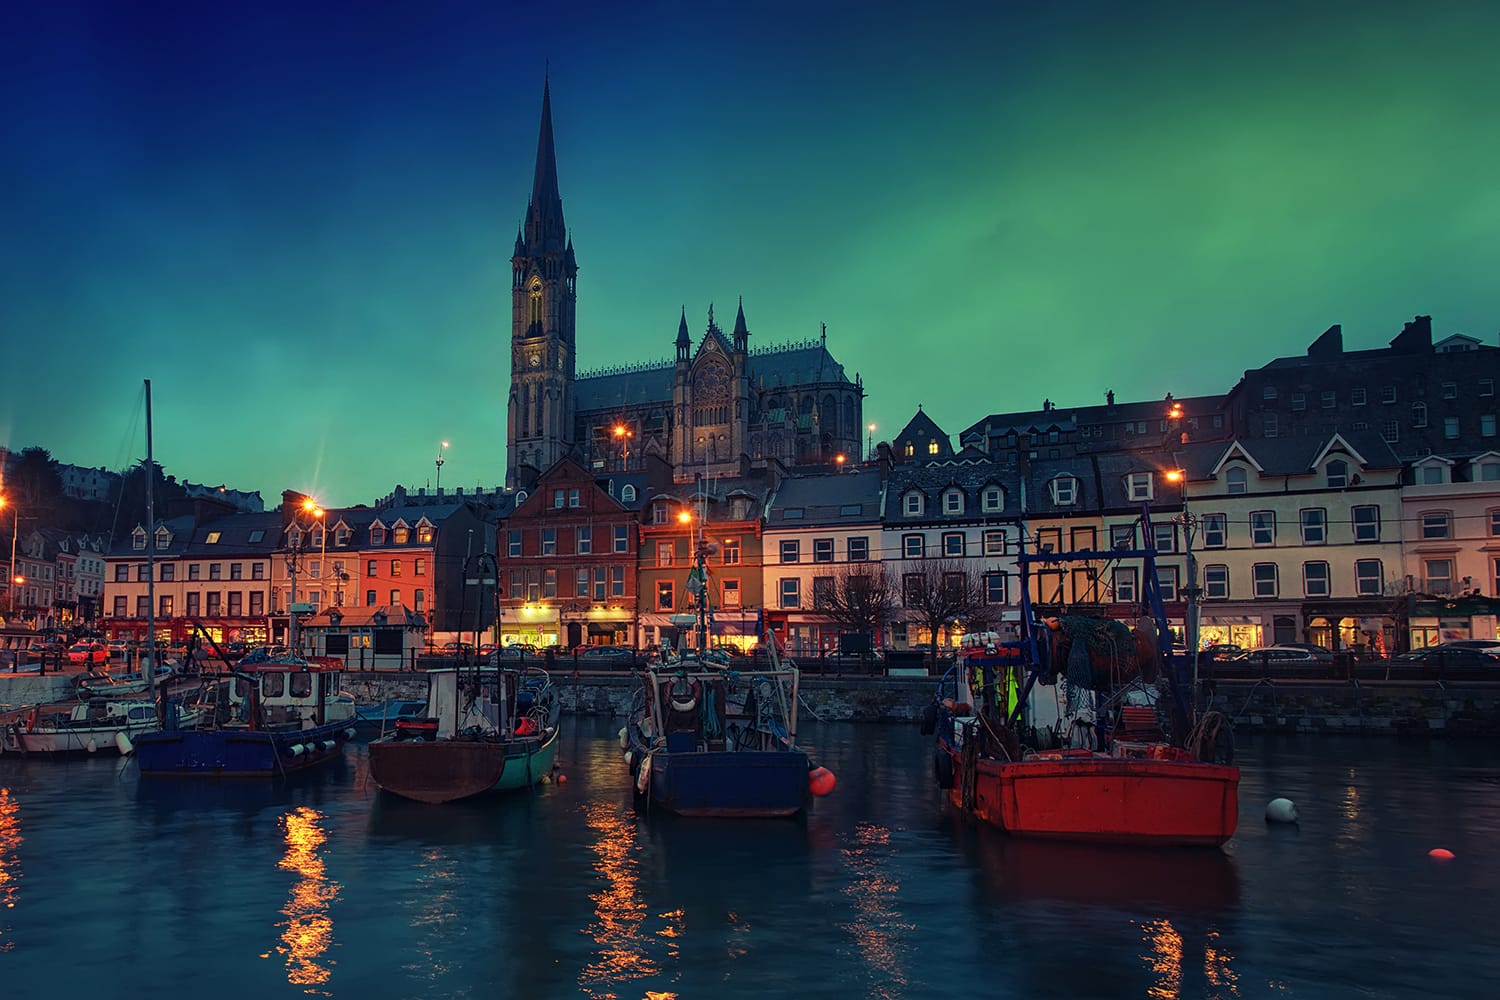 Port, houses, restaurants, shops, bars, pubs and Cathedral at night in Cobh, Ireland